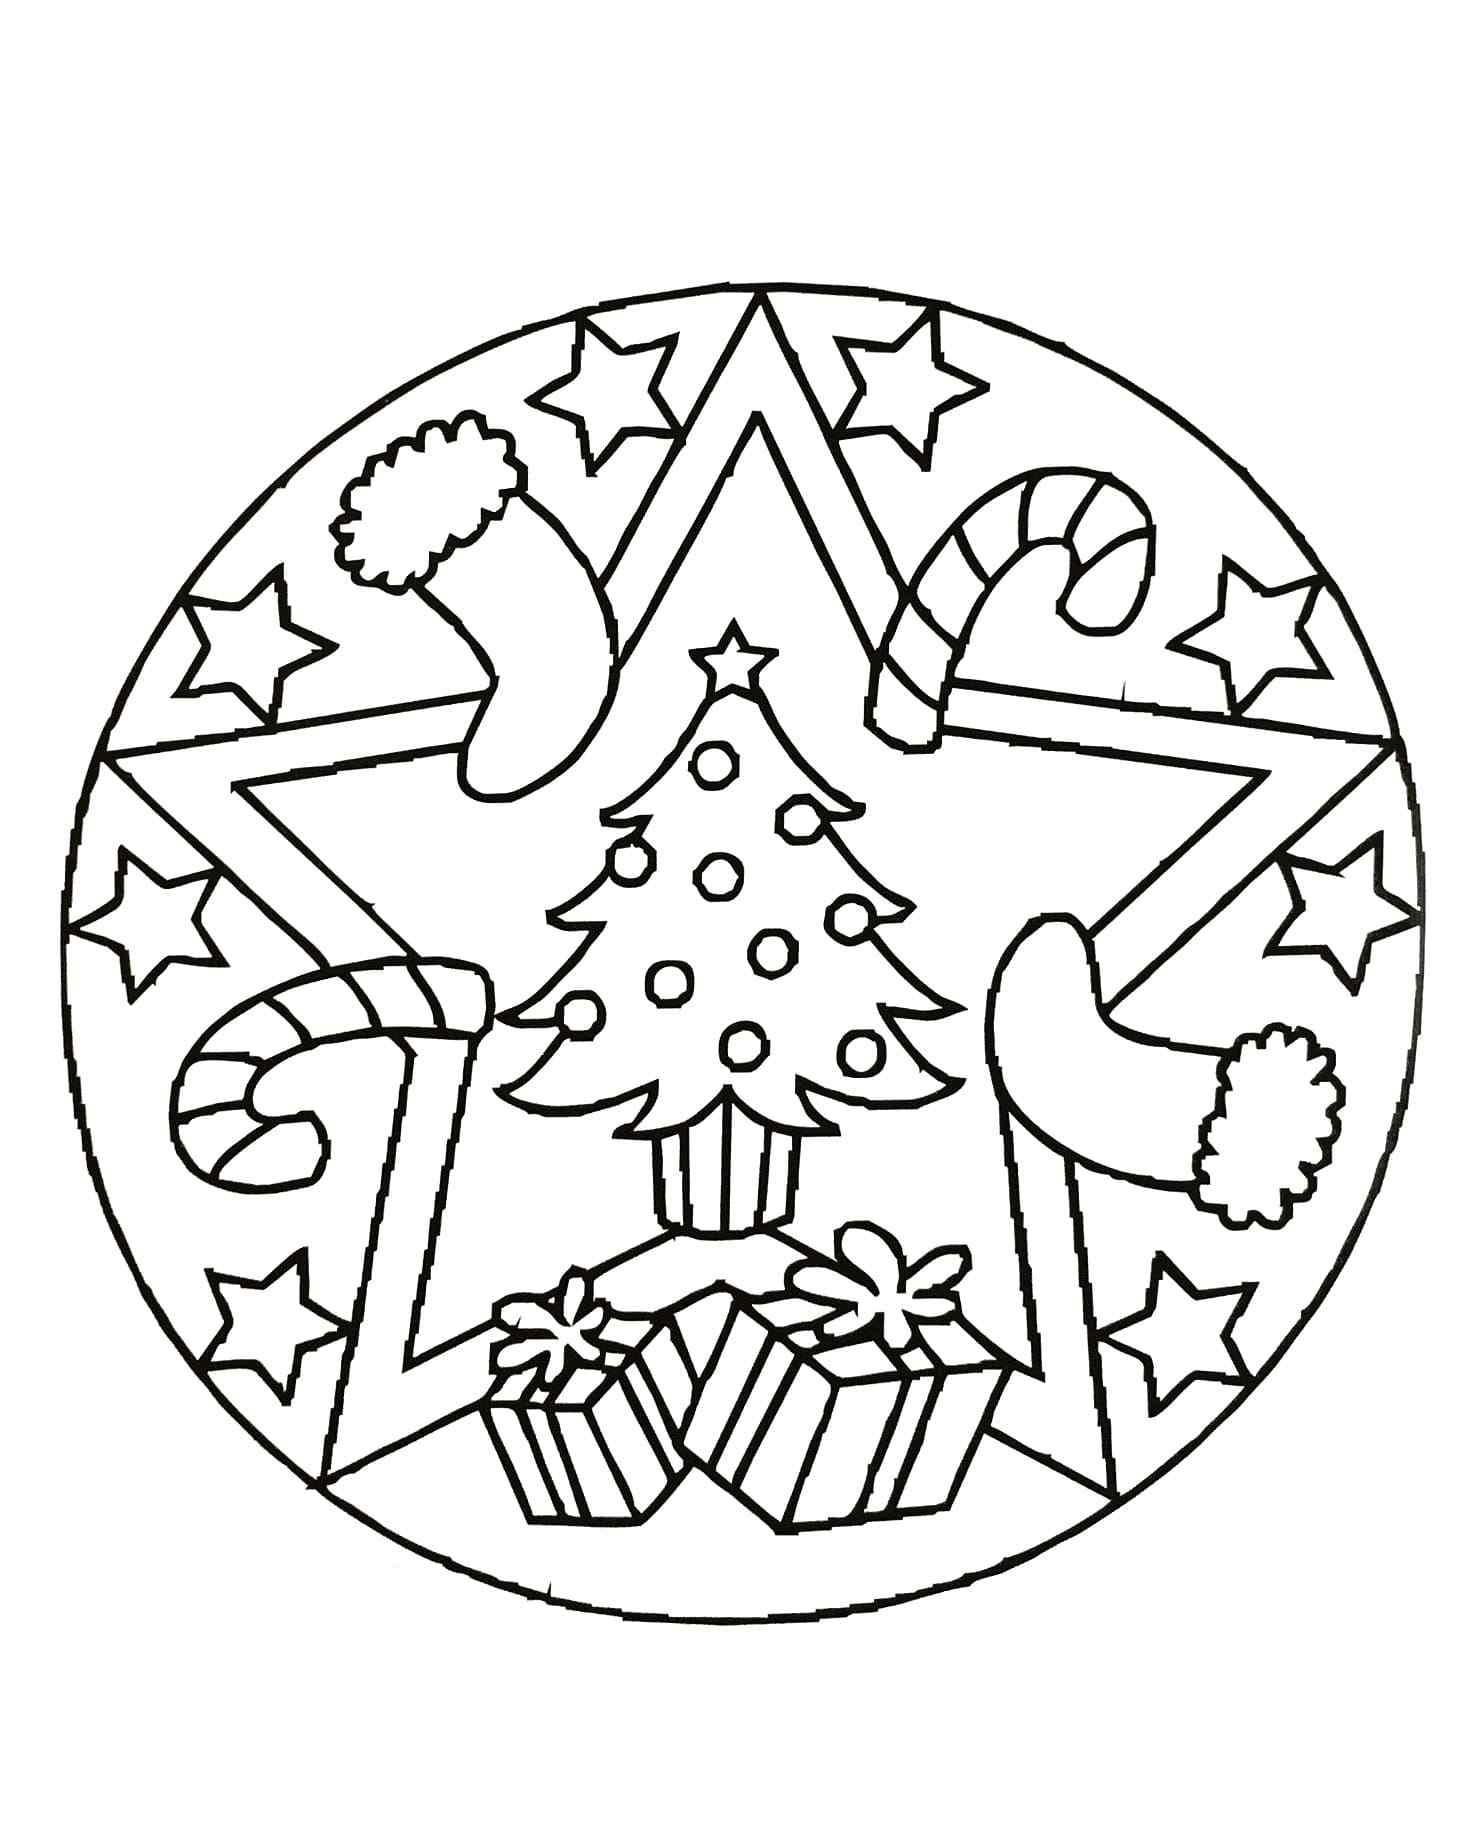 Christmas Plate With Festive Attributes